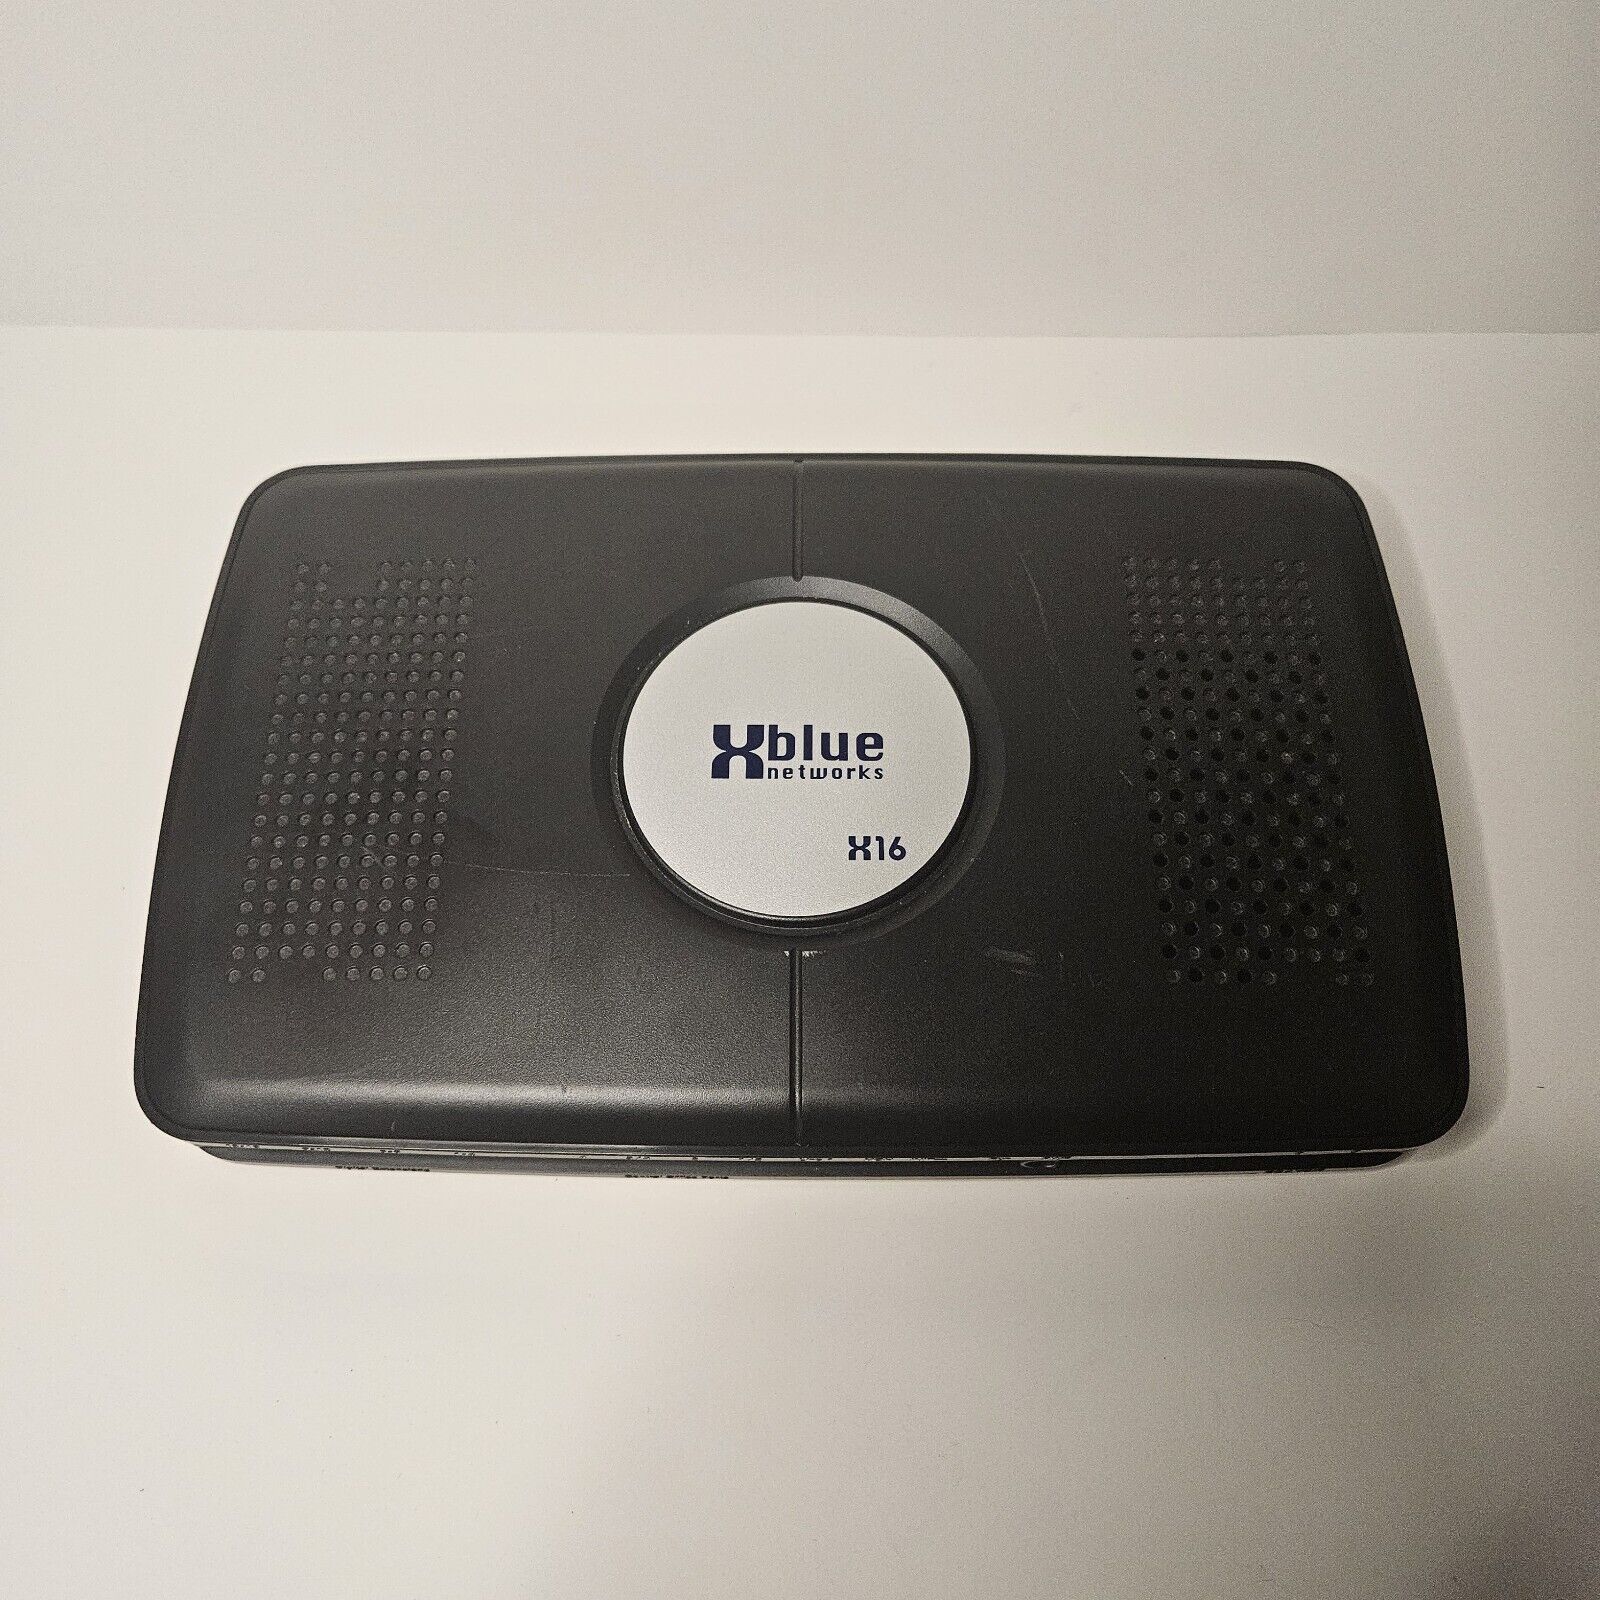 XBlue Networks X16 Business Phone System Communications Server - No Power Cord